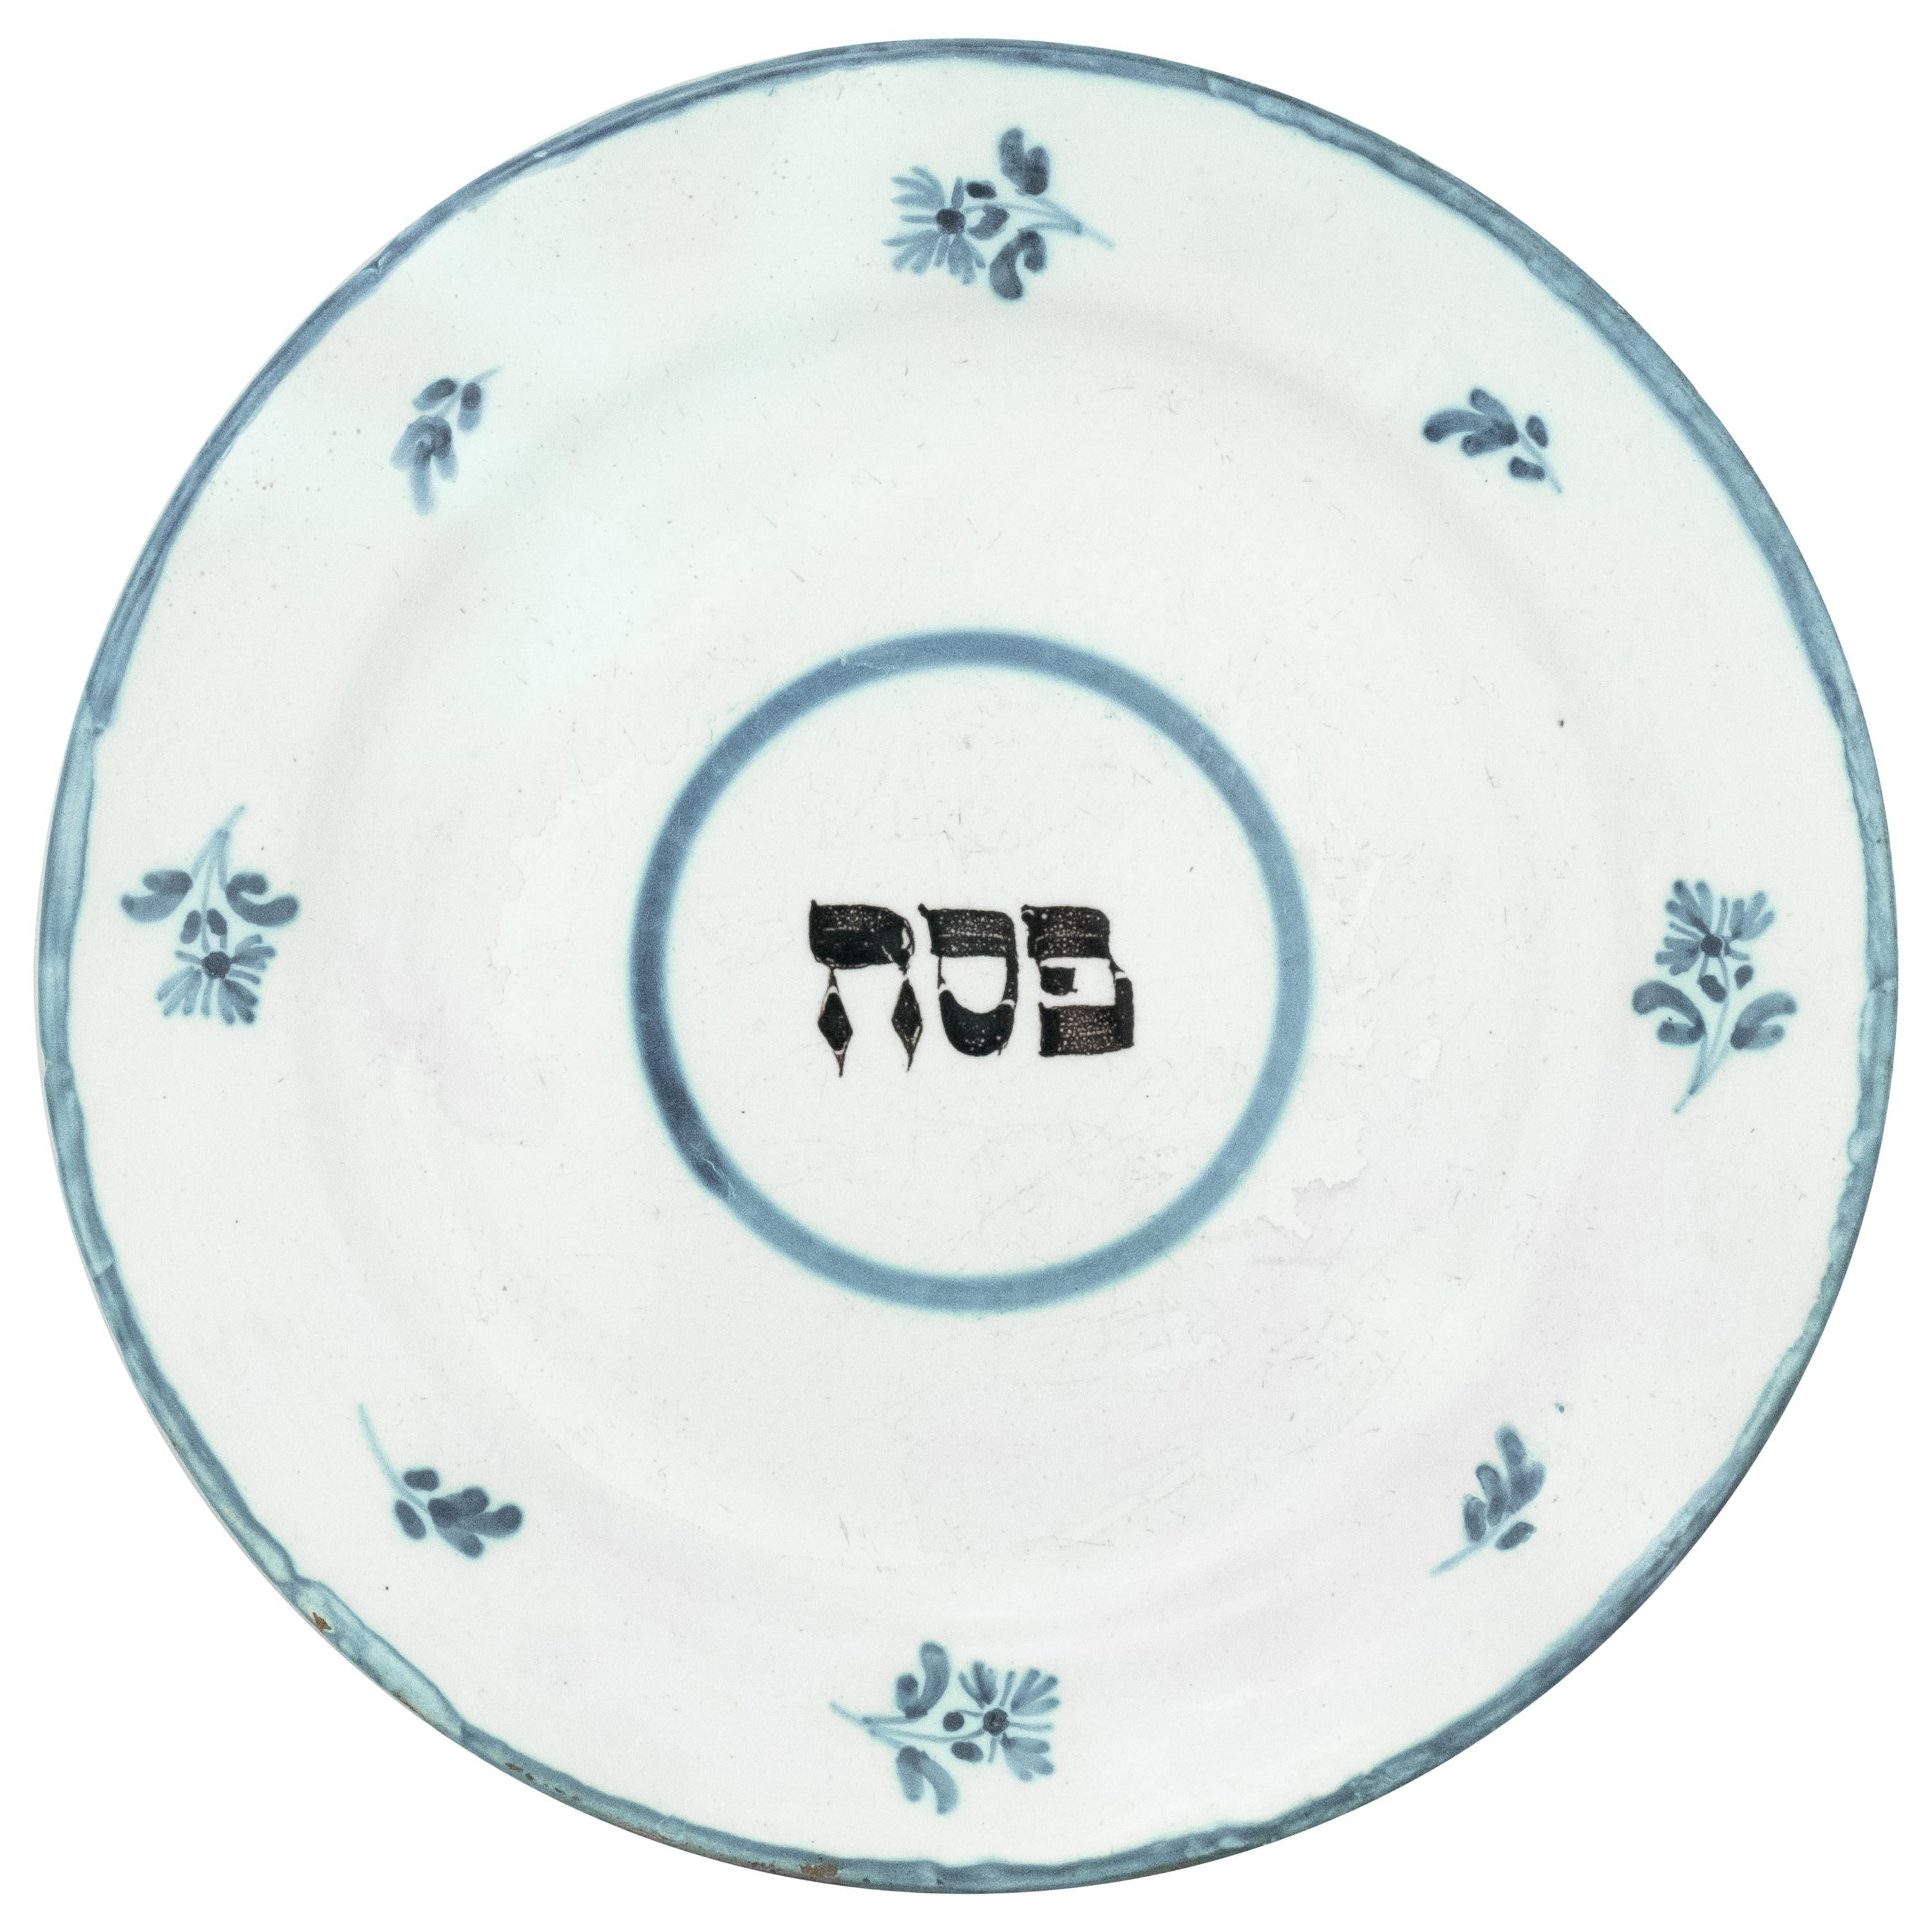 Early 18th Century Dutch Tin-Glazed Earthenware Passover Plate